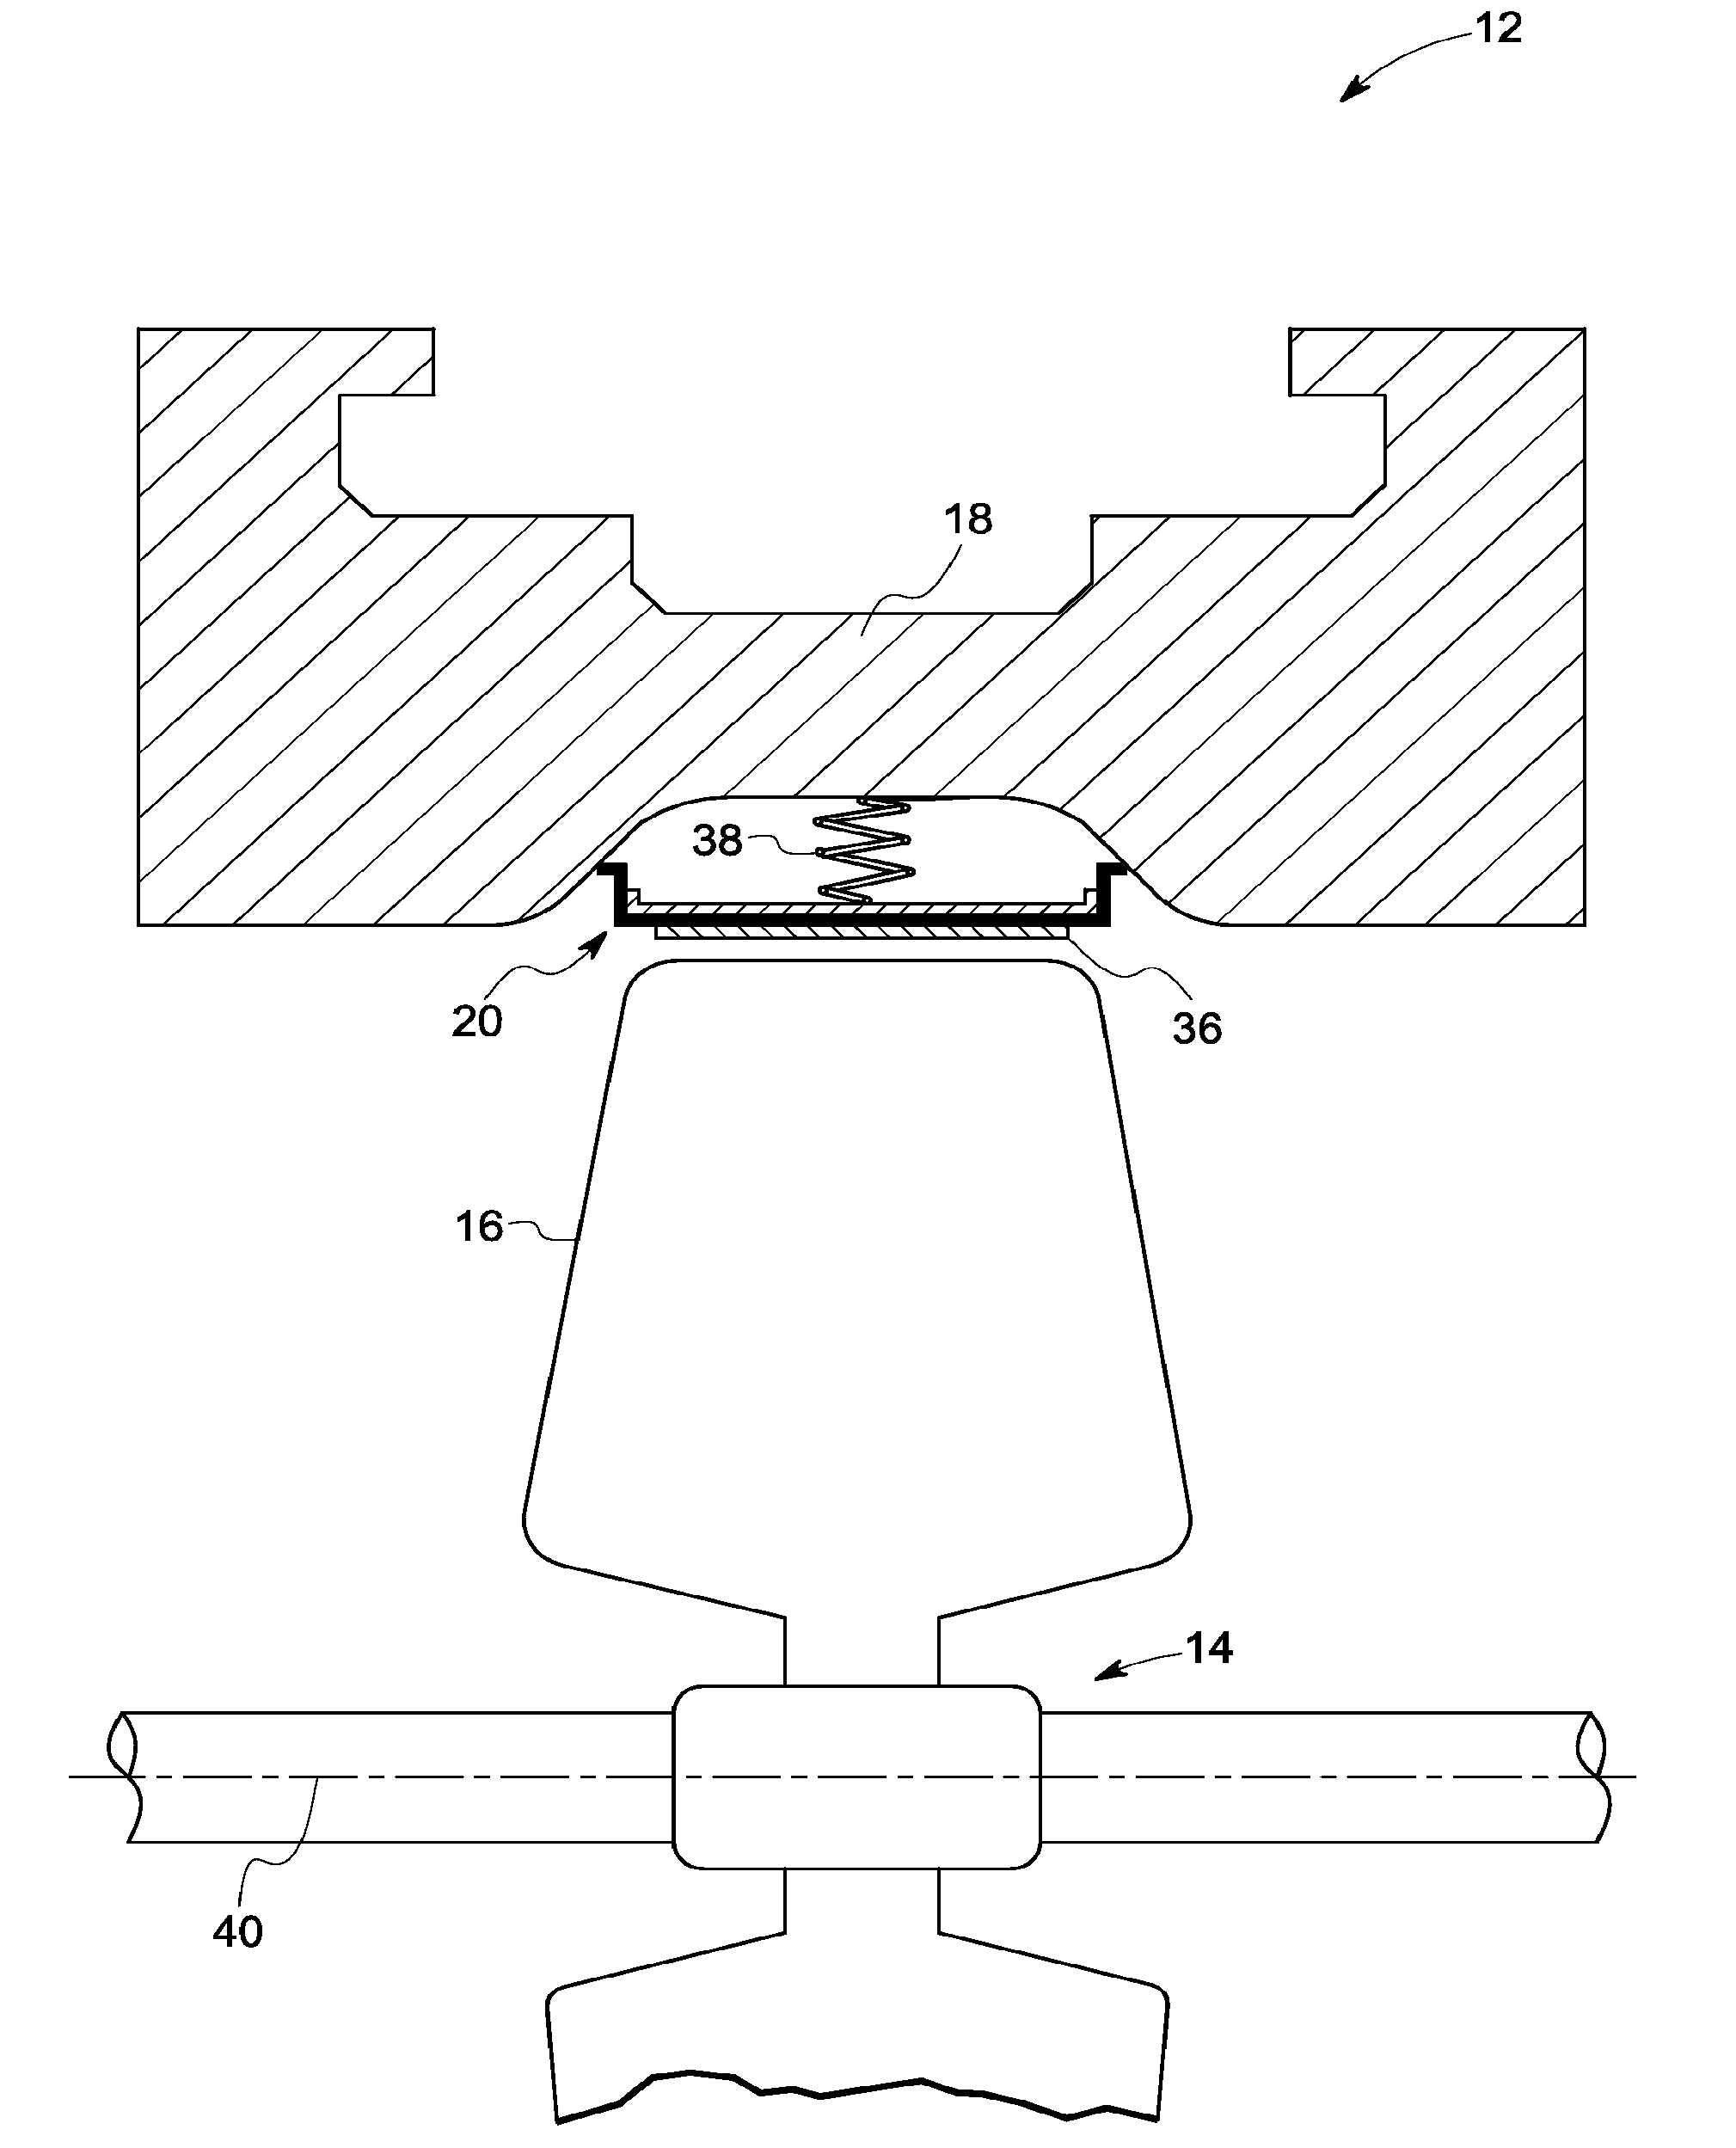 Sealing device and method for turbomachinery